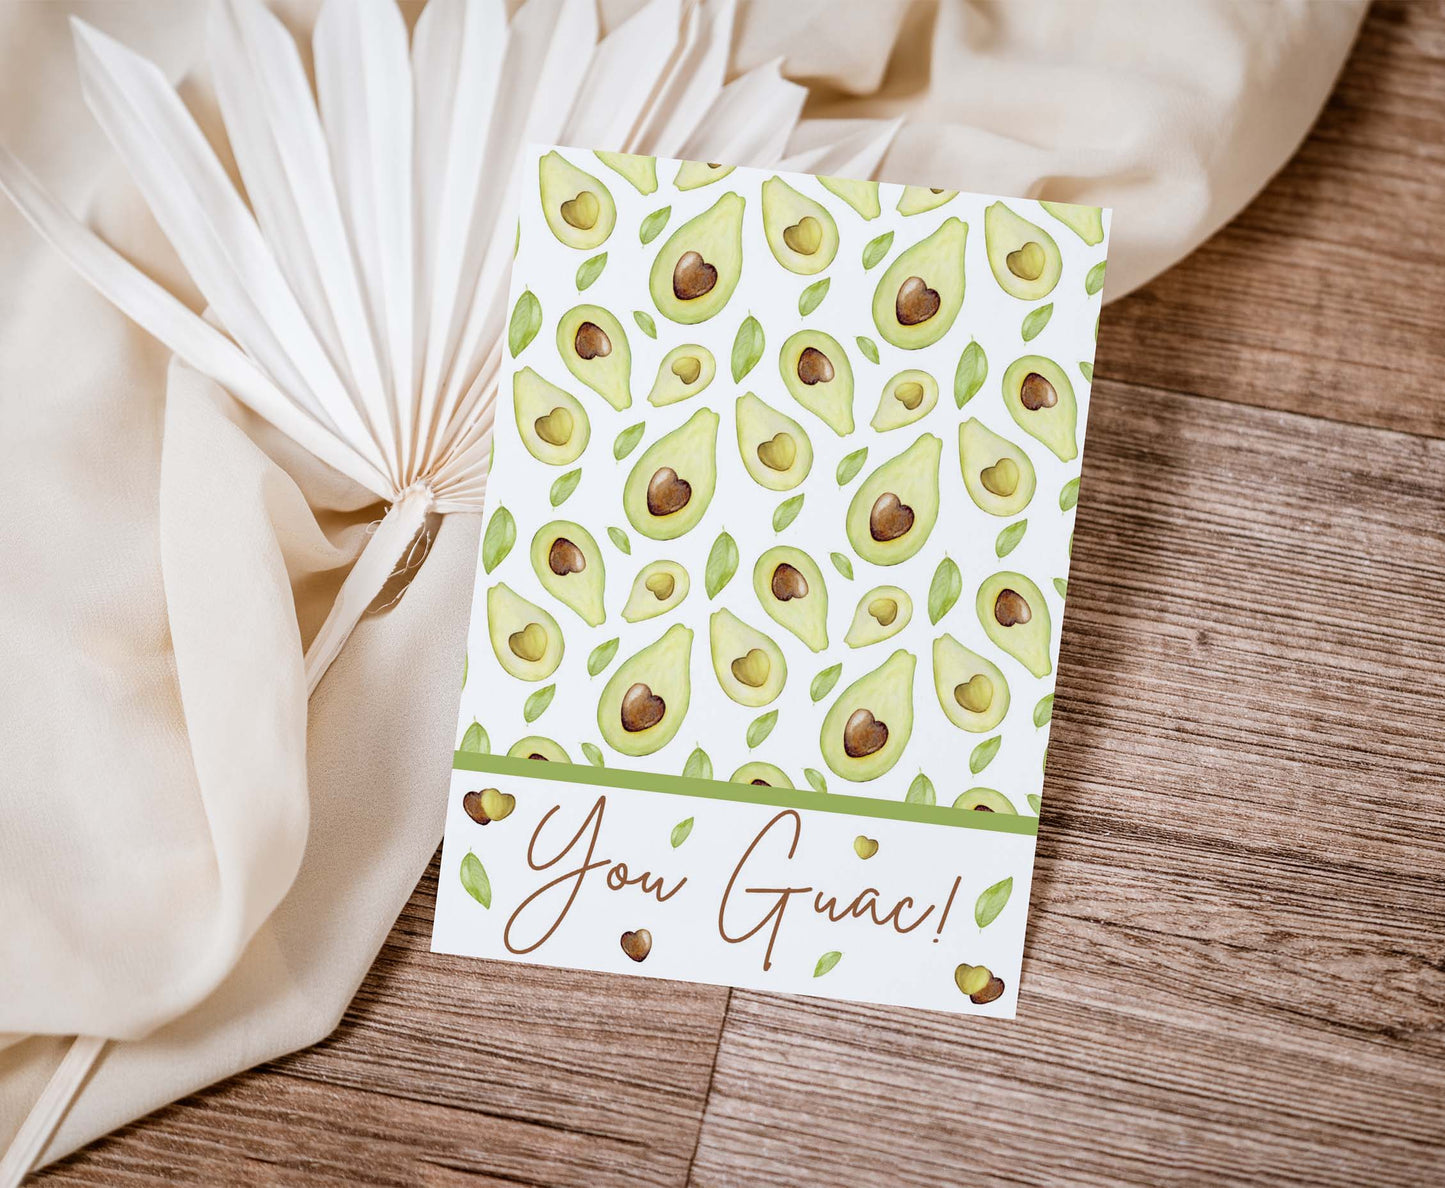 You Guac Cookie Card | Valentines Printable Cards - 119